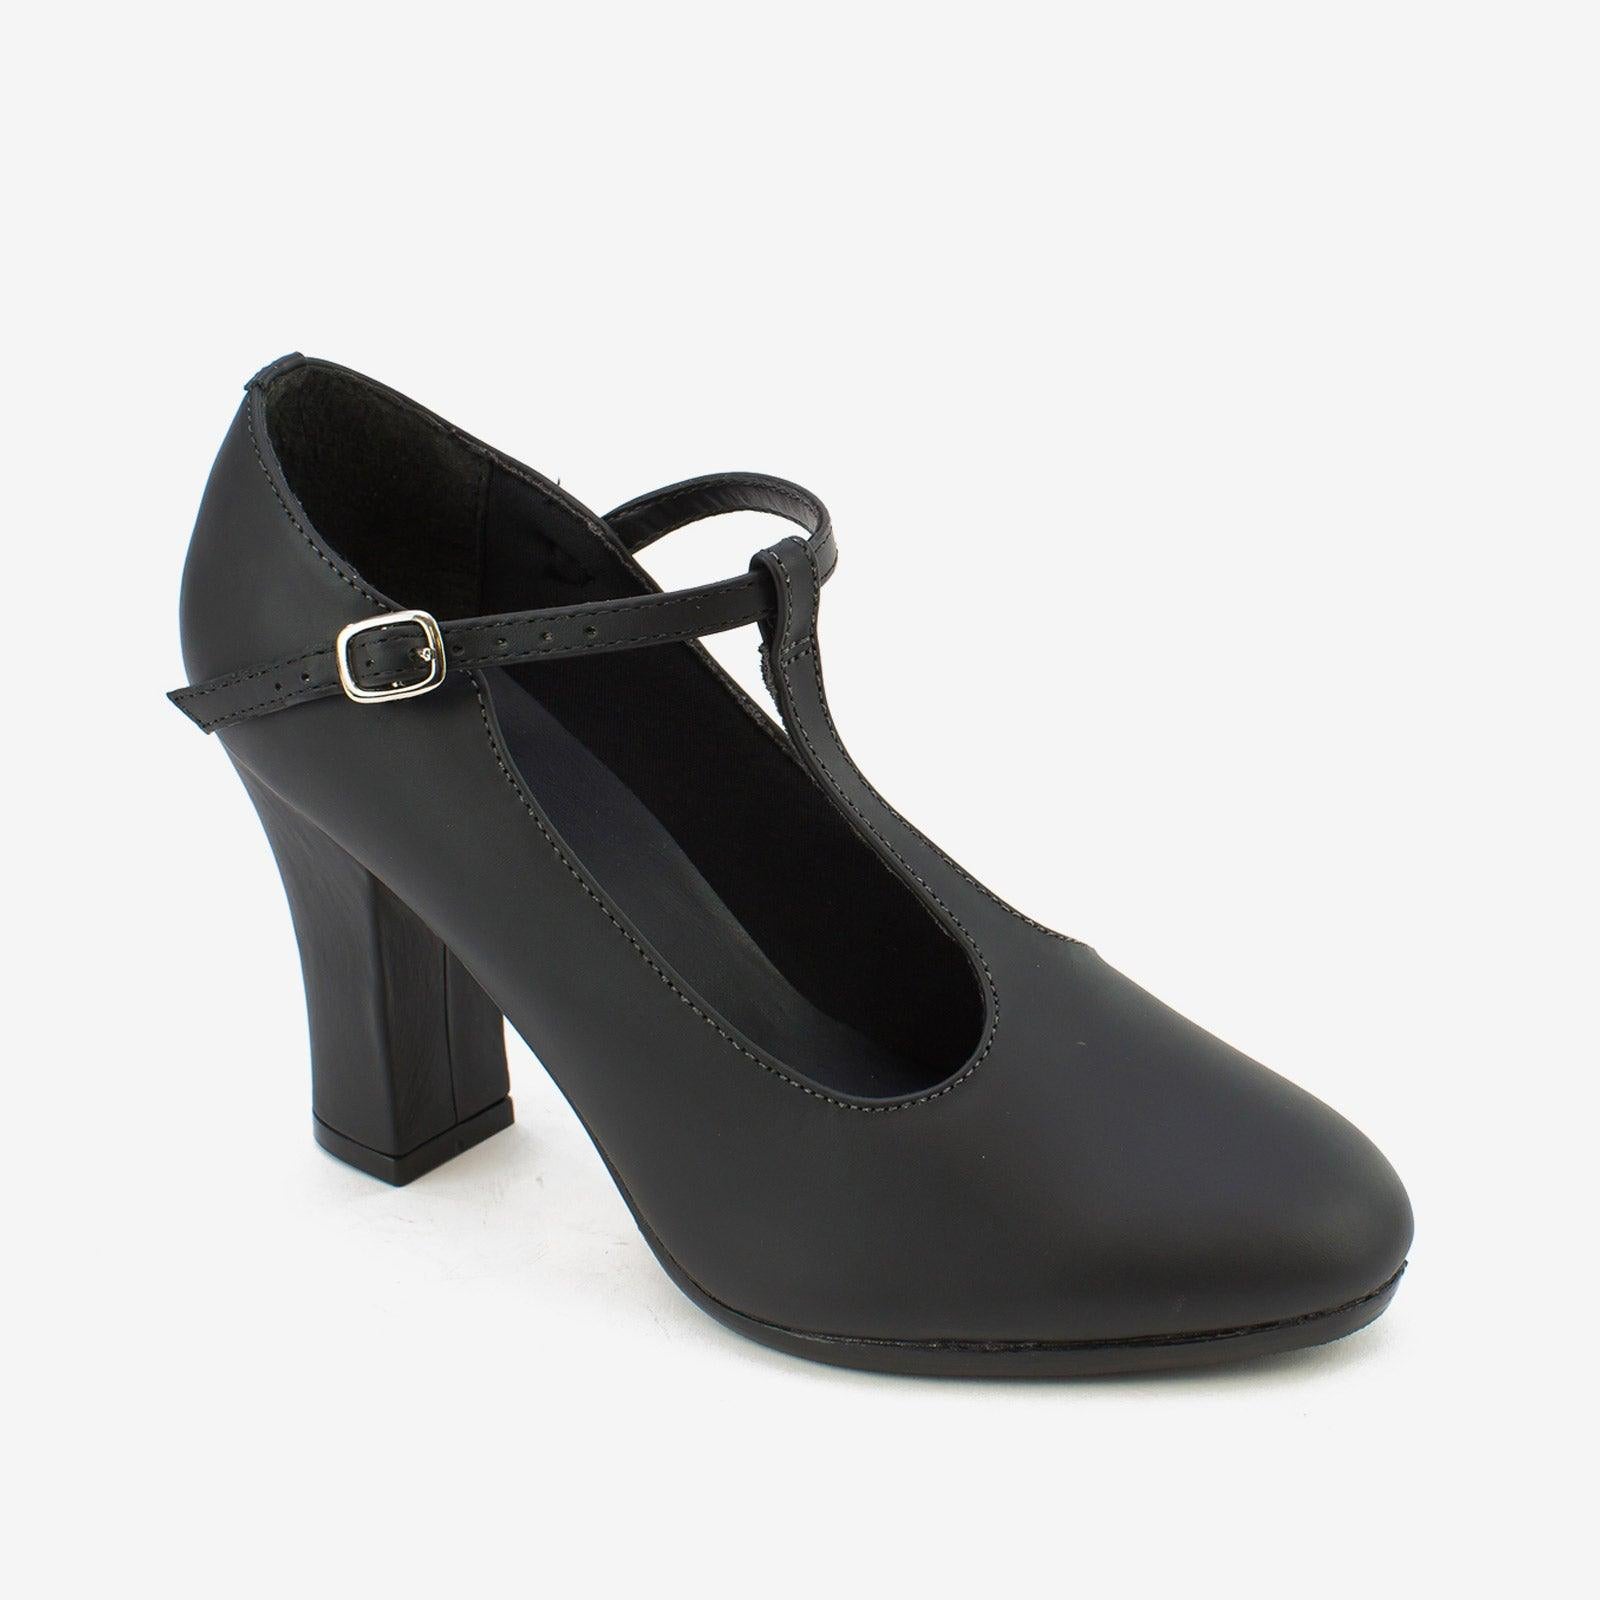 Connie T-Strap Character Shoe with Suede Soles by So Danca : CH57